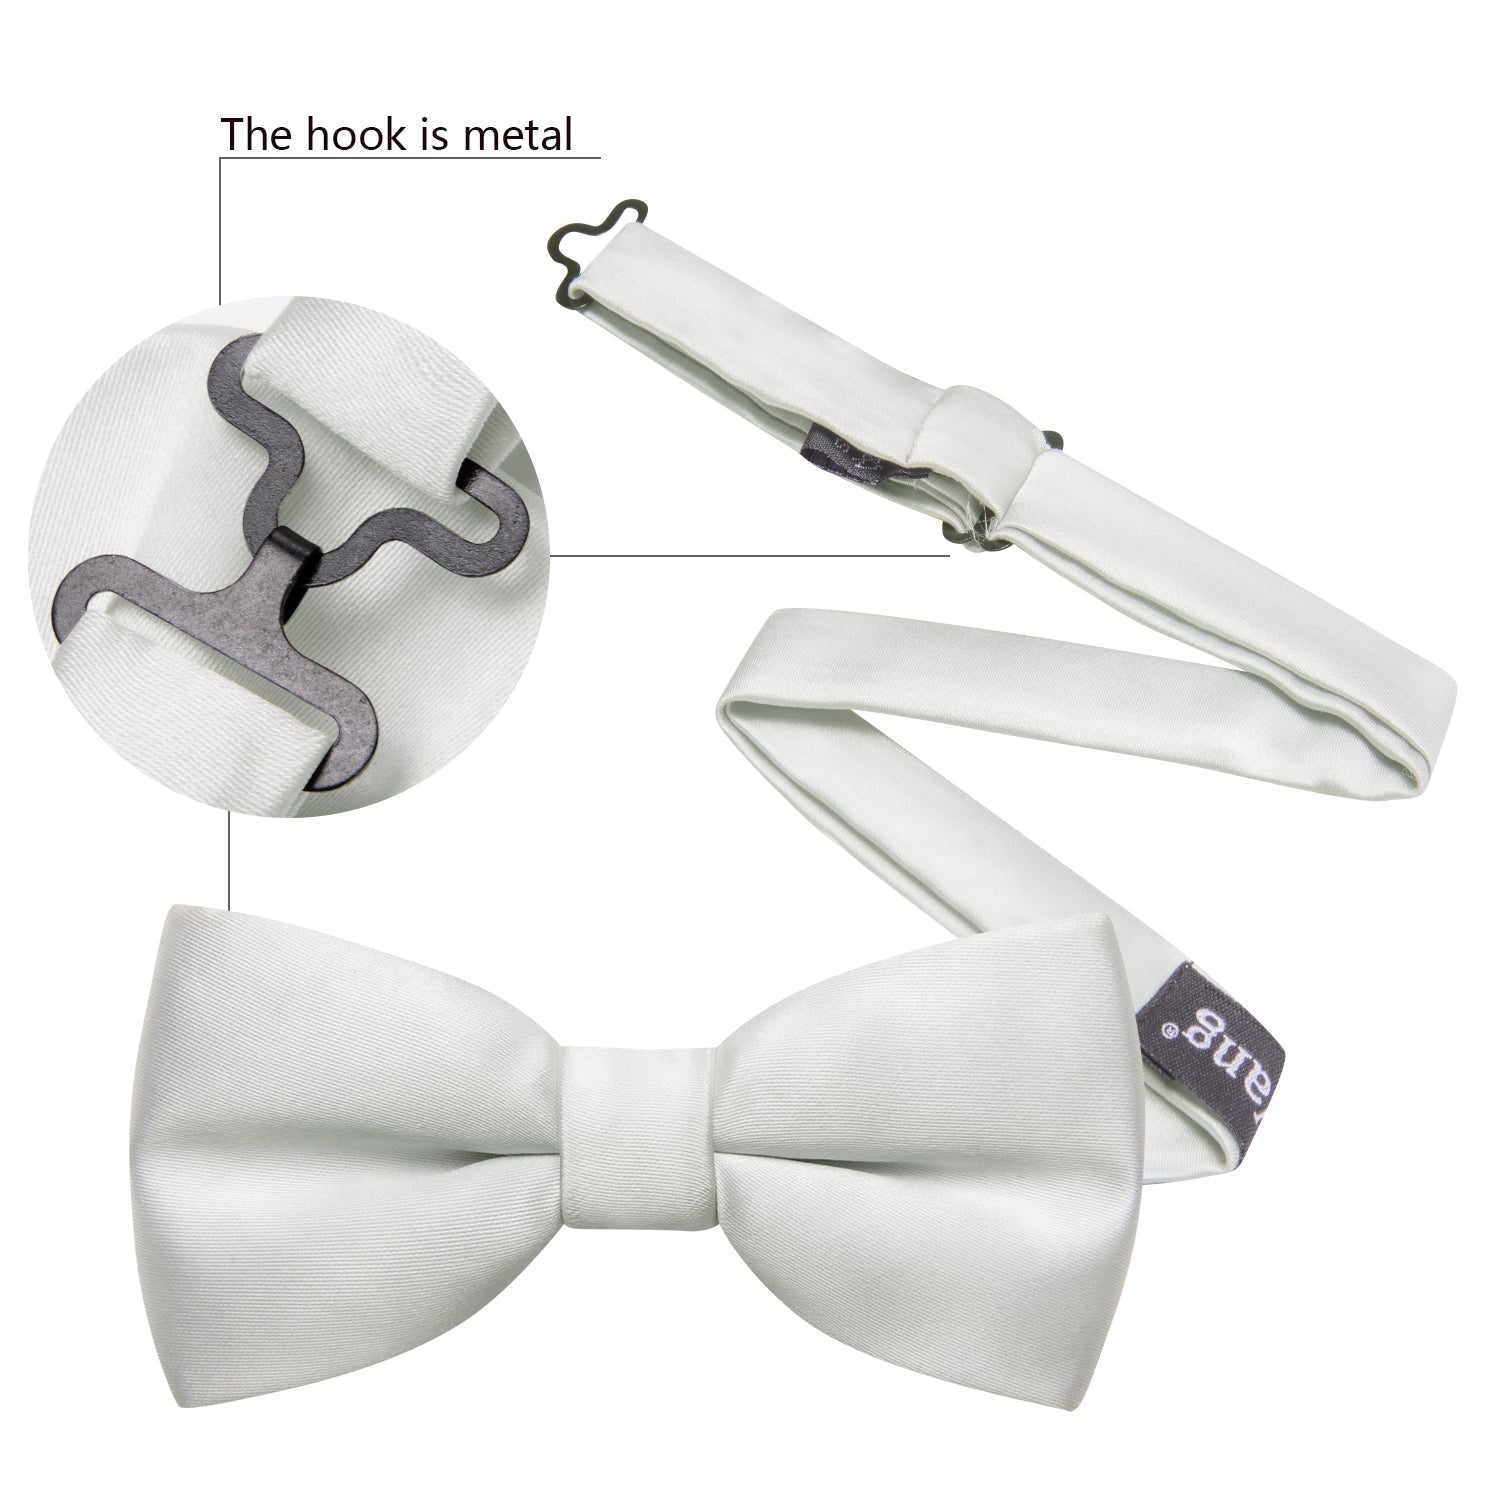 Grey White Solid Bow Tie Pocket Square Set For Kids